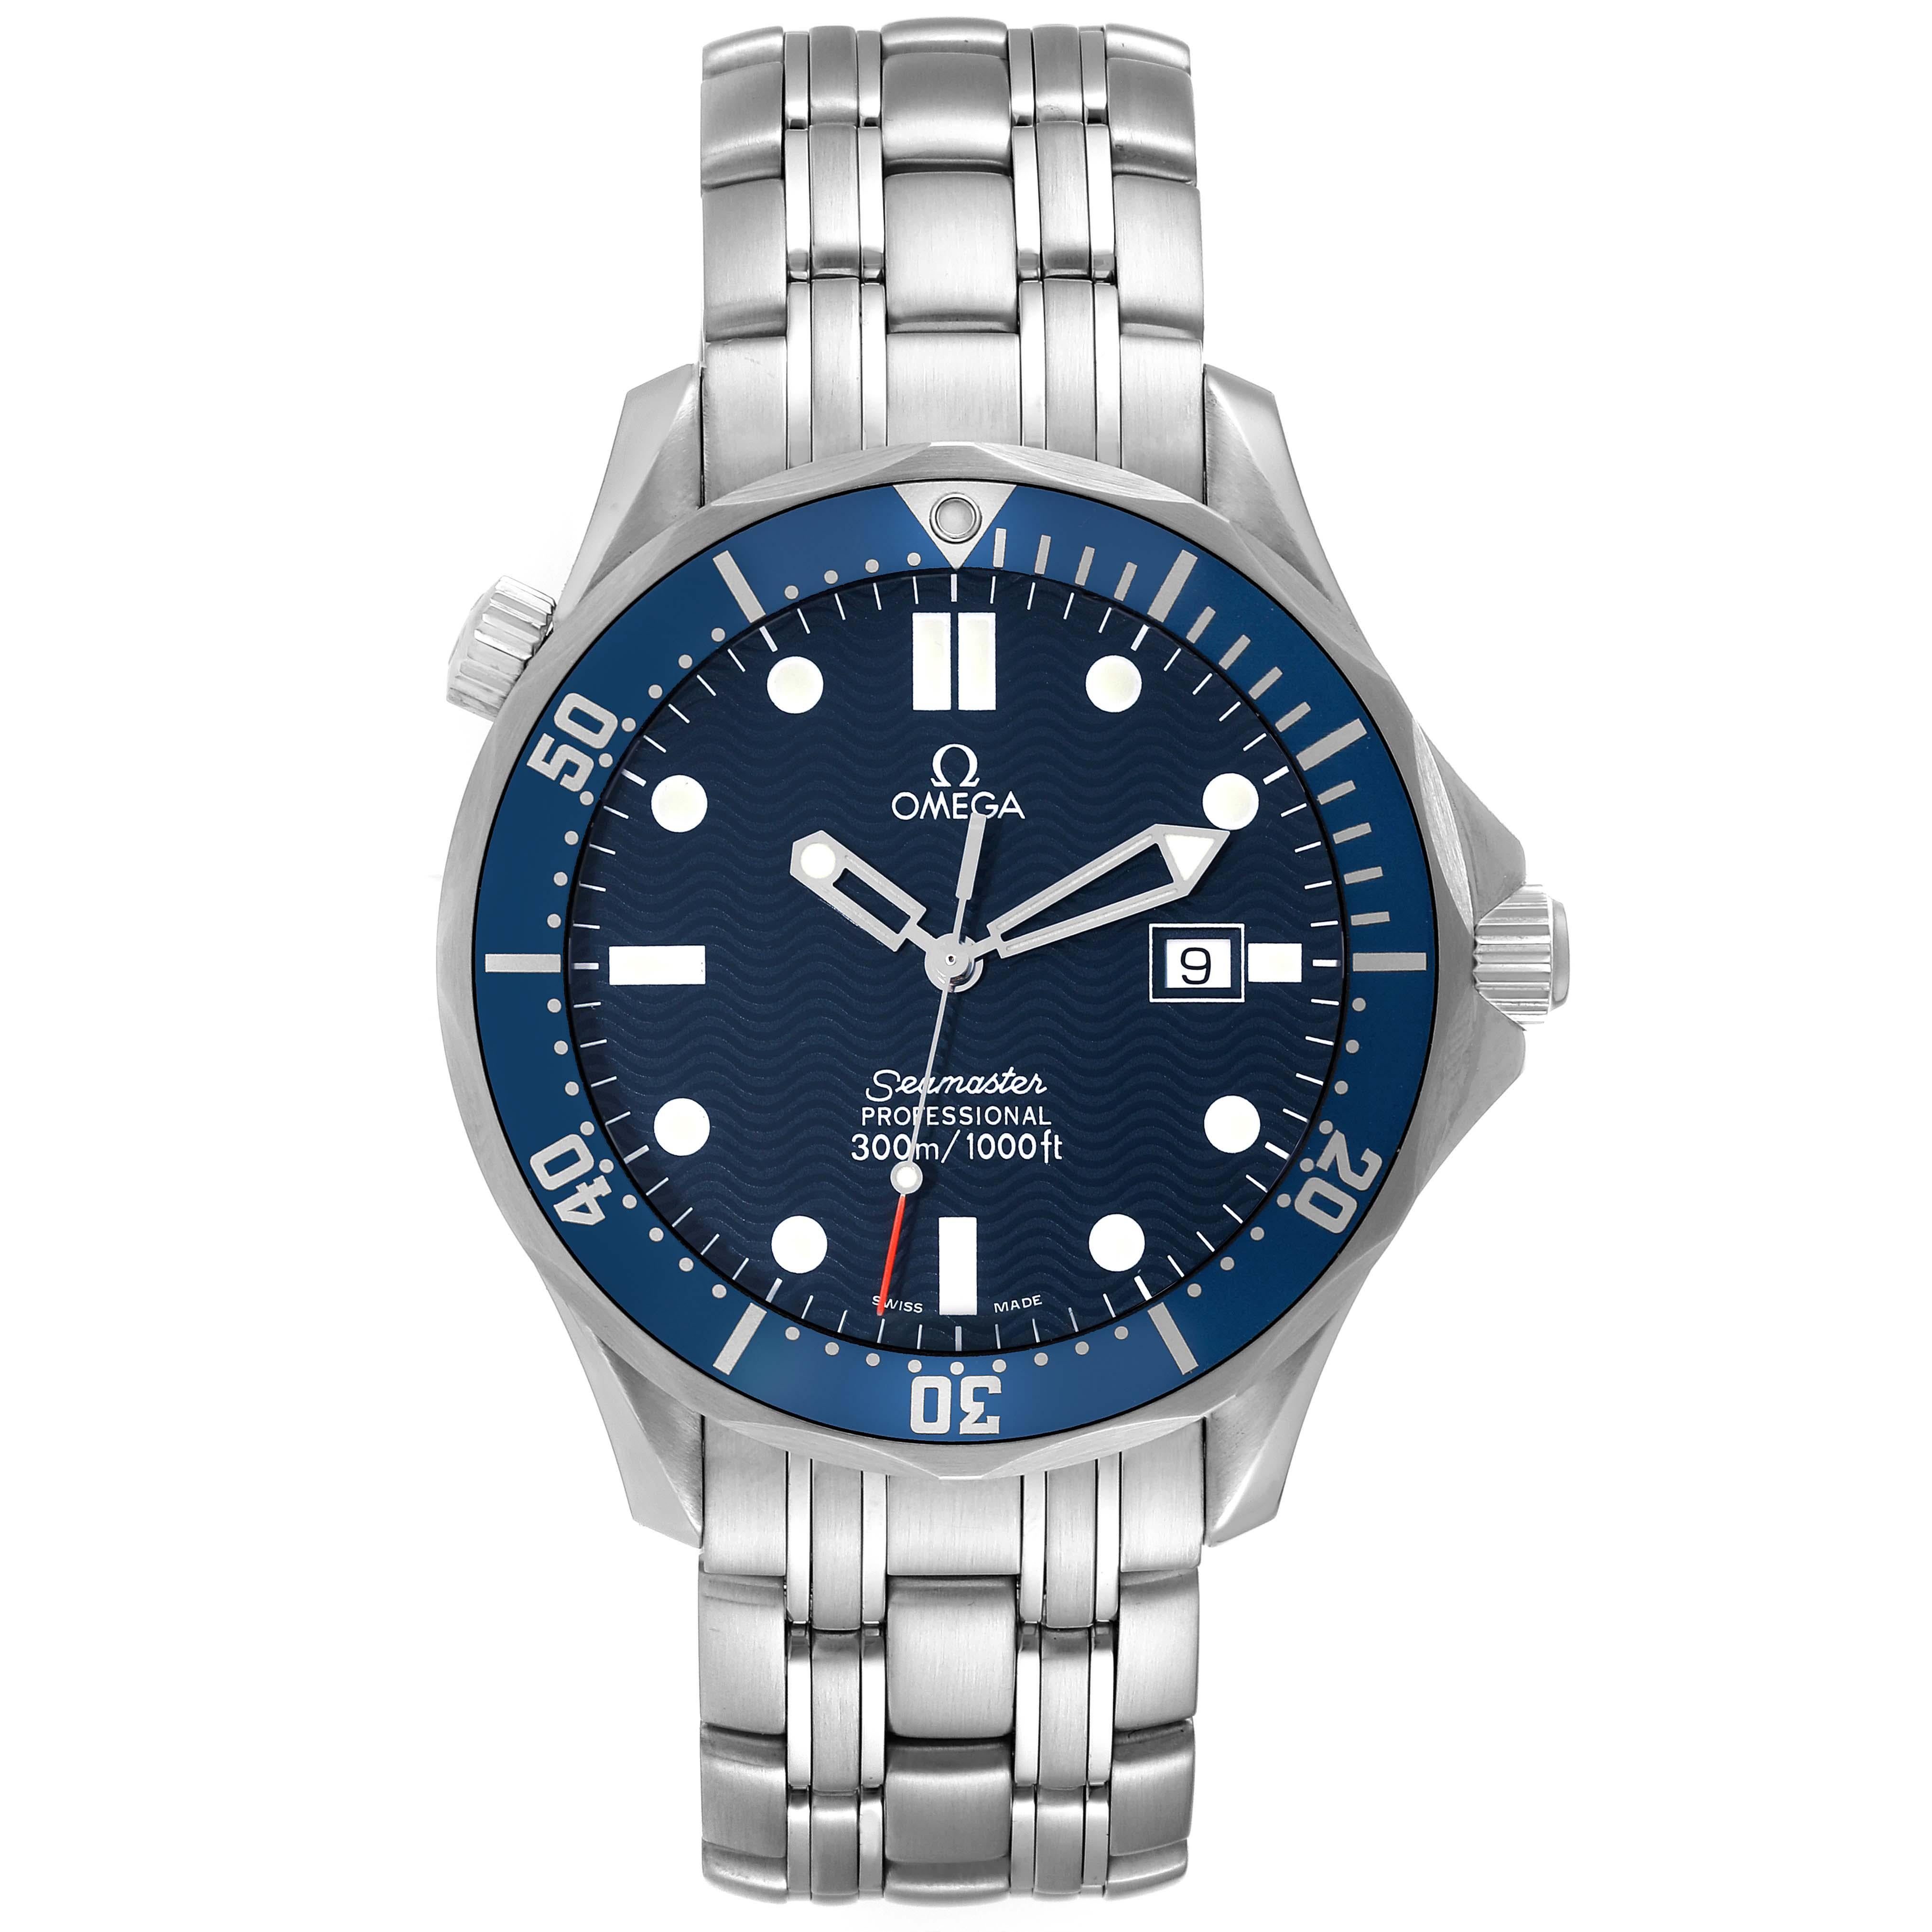 Omega Seamaster Diver James Bond Steel Mens Watch 2541.80.00. Quartz movement. Stainless steel case 41 mm in diameter. Omega logo on the crown. Helium escape valve at 10 o'clock. Blue unidirectional rotating bezel. Scratch resistant sapphire